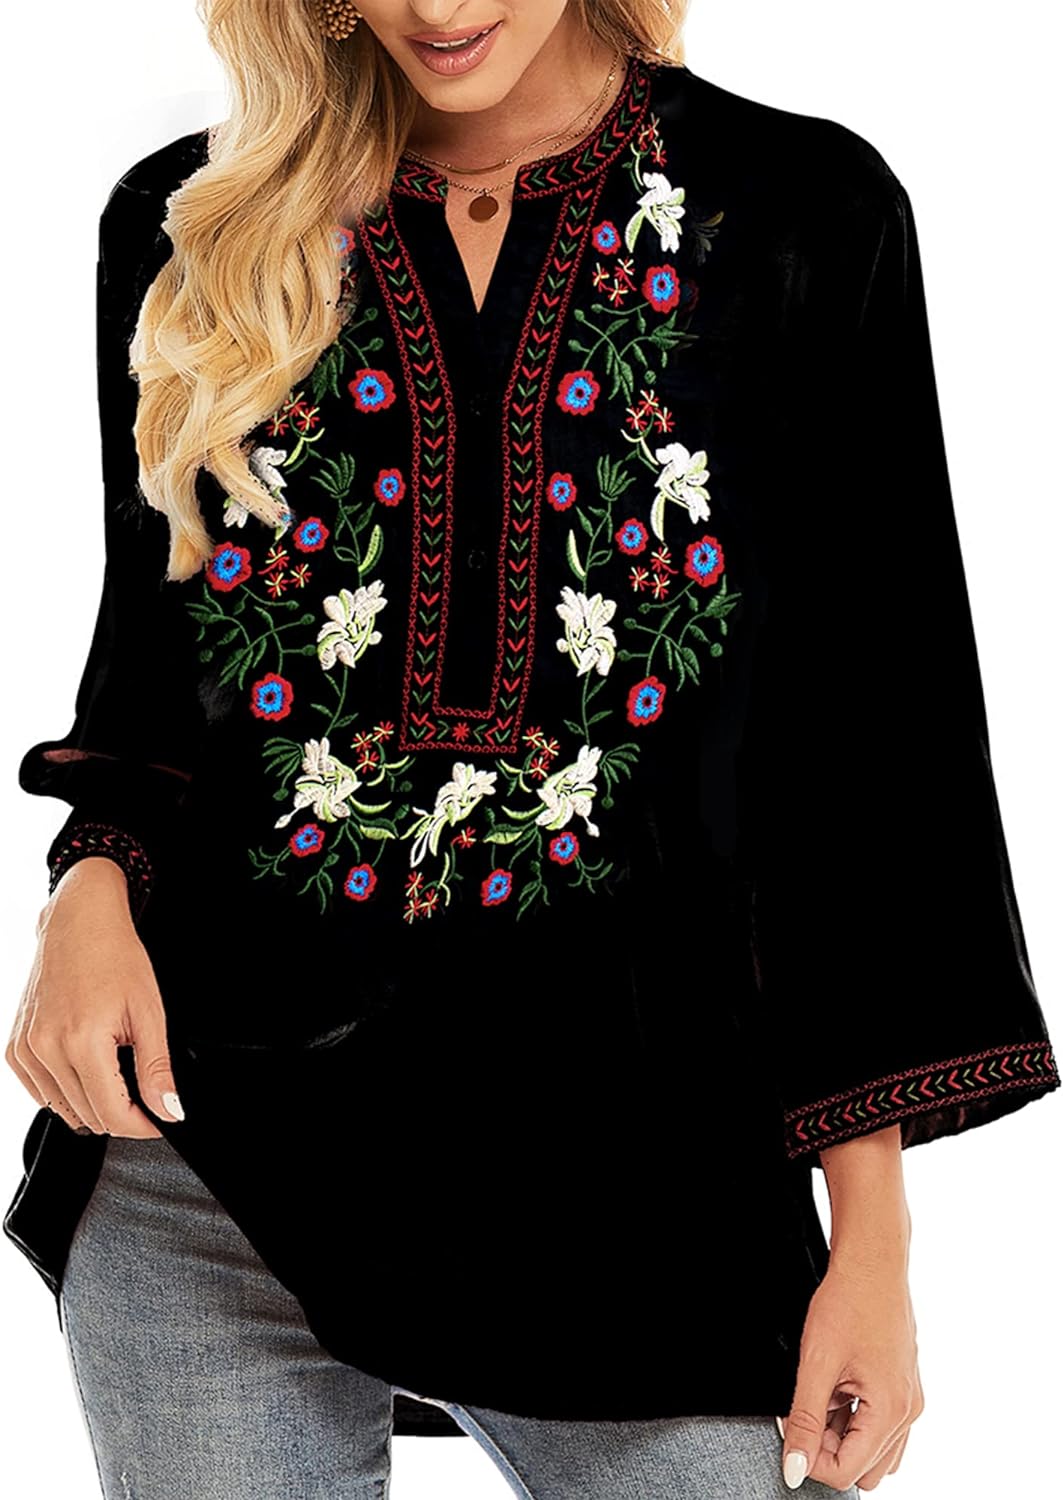 Mexican Embroidered Women's Shirts Mexico Peasant Boho Tops 3/4 Sleeves ...